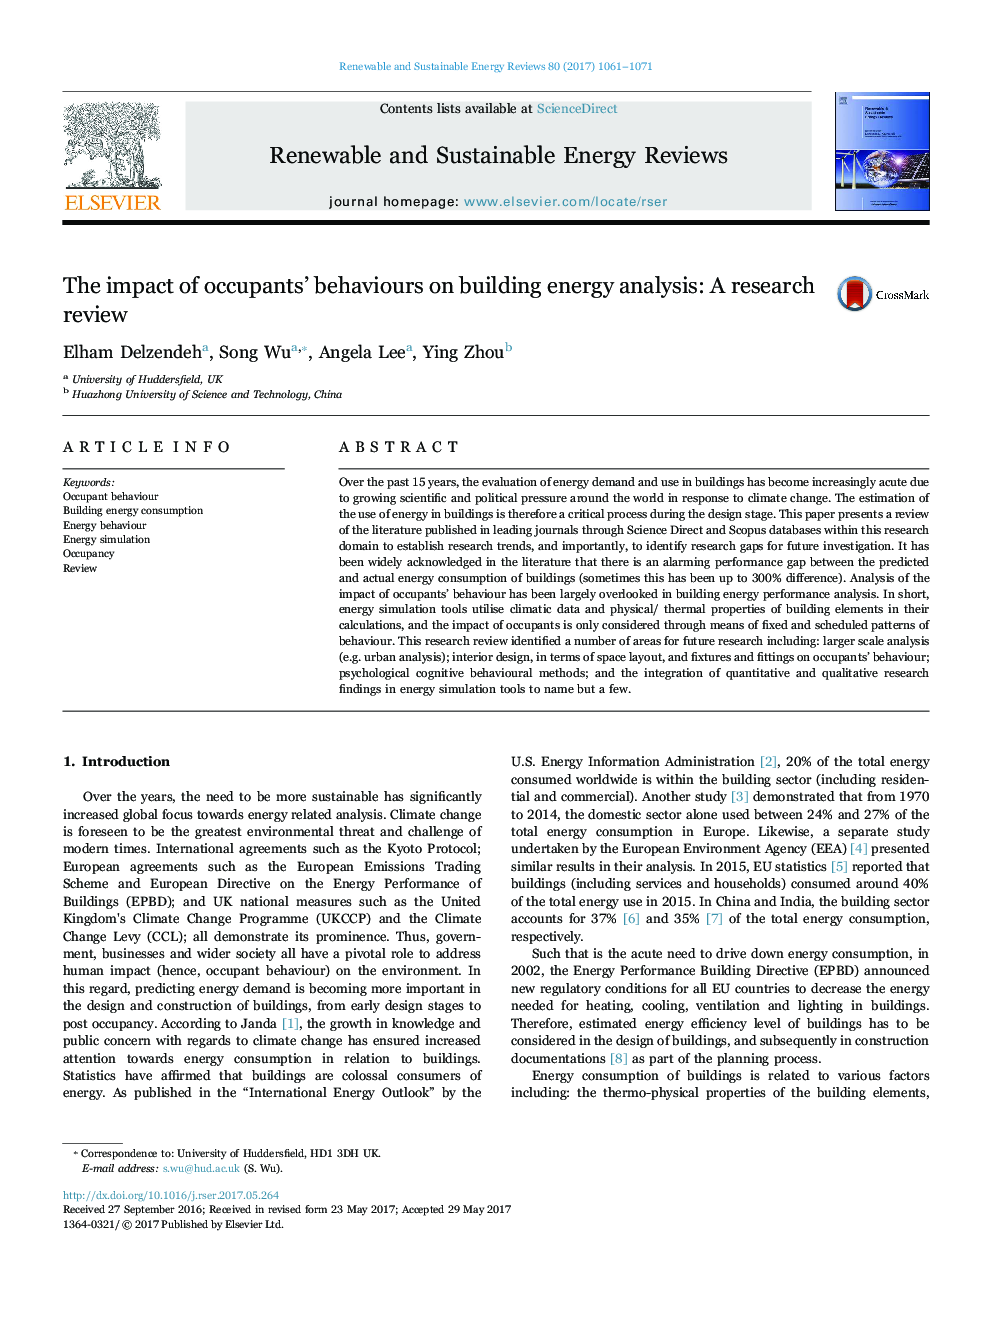 The impact of occupants' behaviours on building energy analysis: A research review